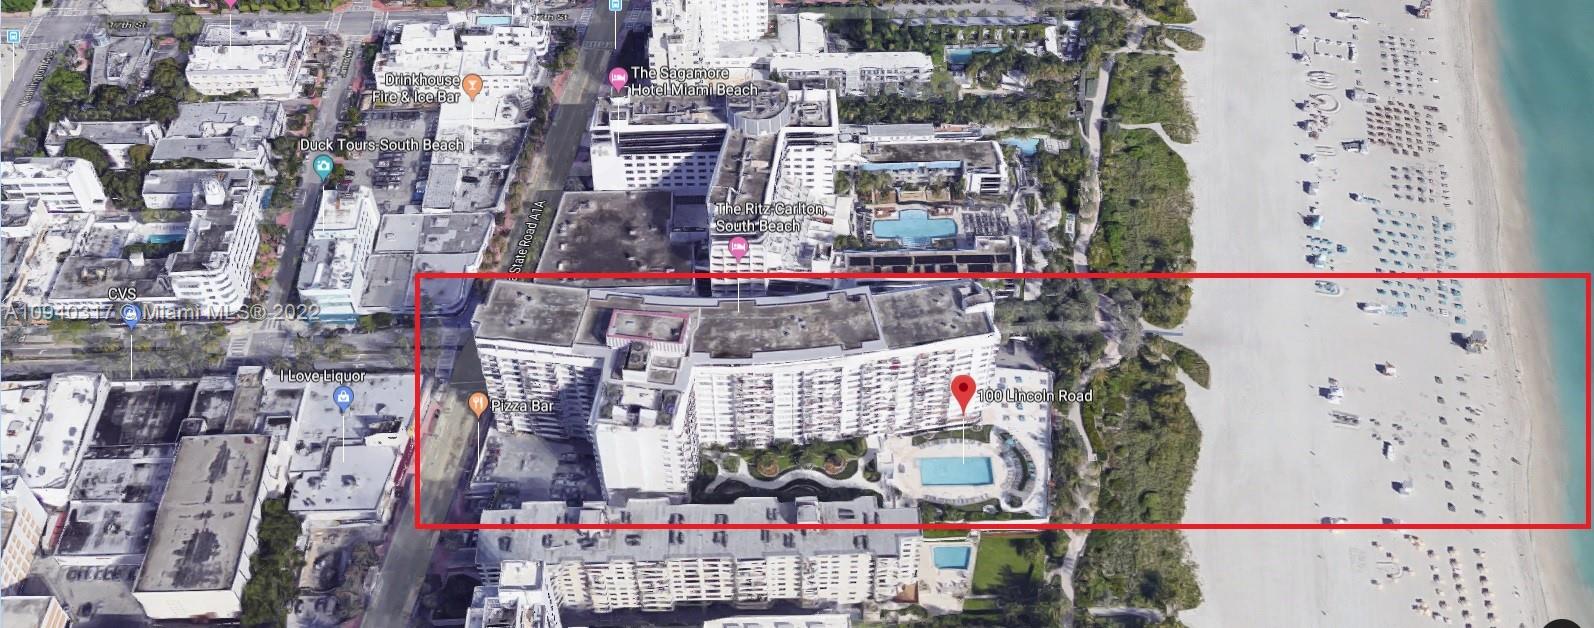 100 Lincoln Rd, Miami Beach, FL, 33139 United States, 2 Bedrooms Bedrooms, ,2 BathroomsBathrooms,Residential,For Sale,Lincoln Rd,A10940317